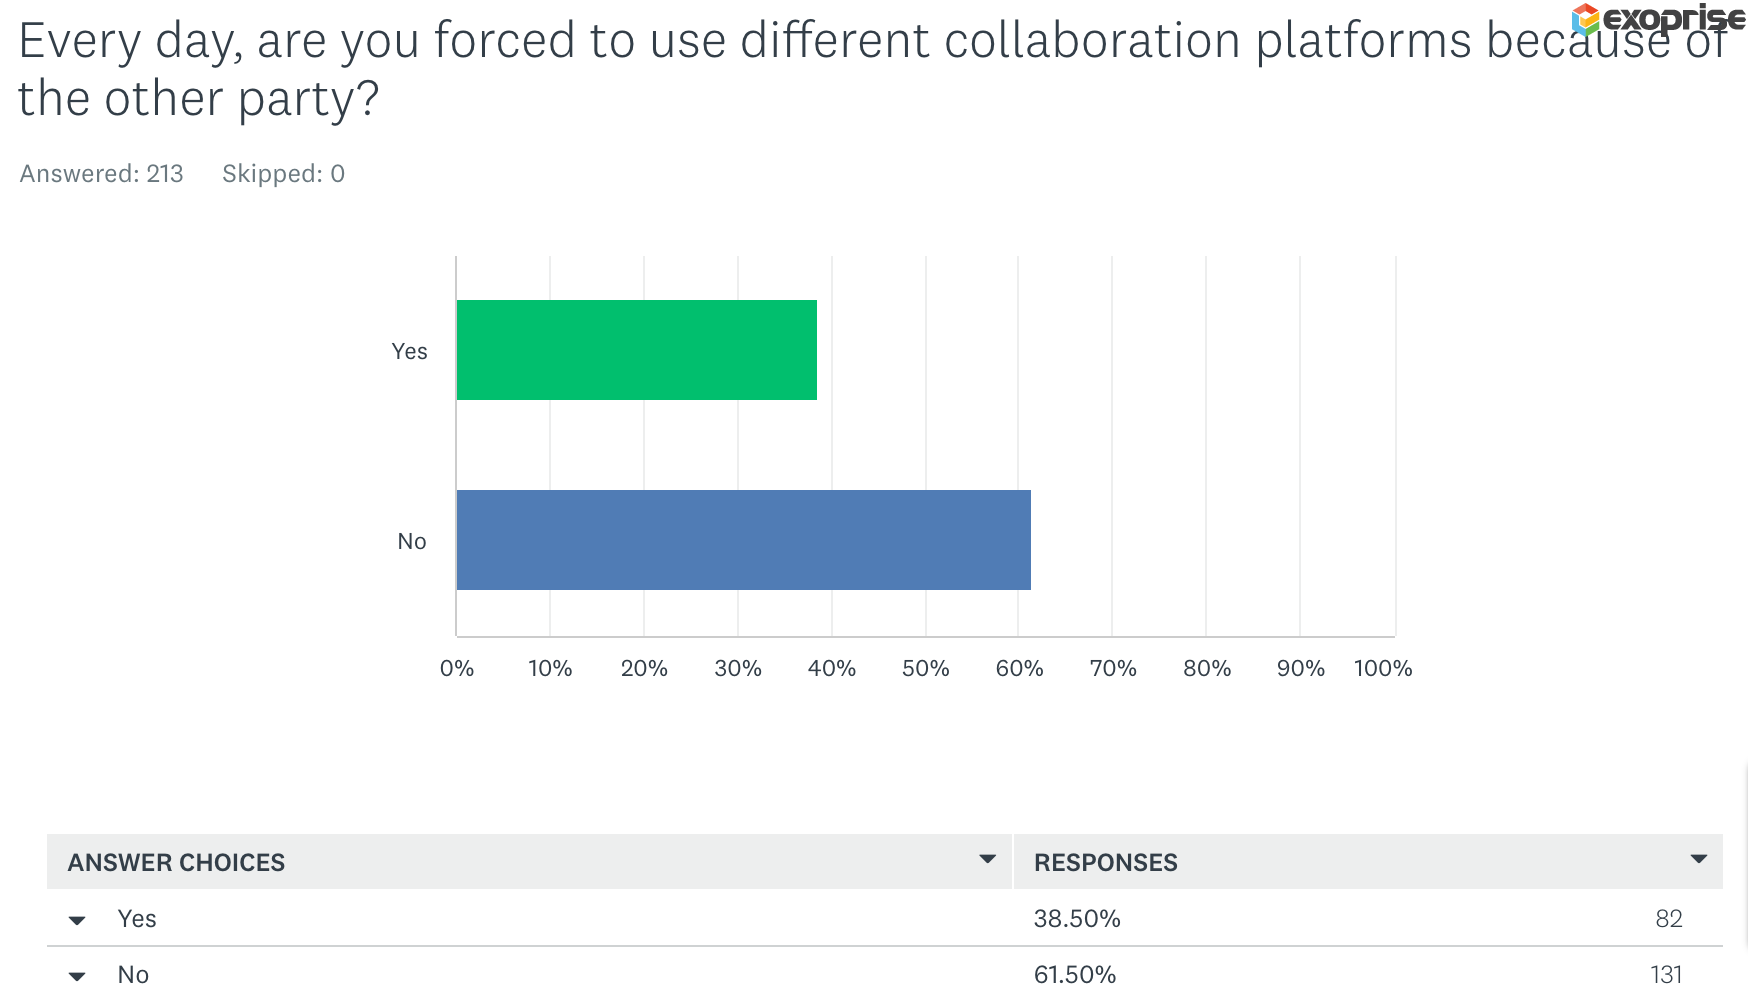 Do you have to switch between collaboration platforms like Teams or Zoom?